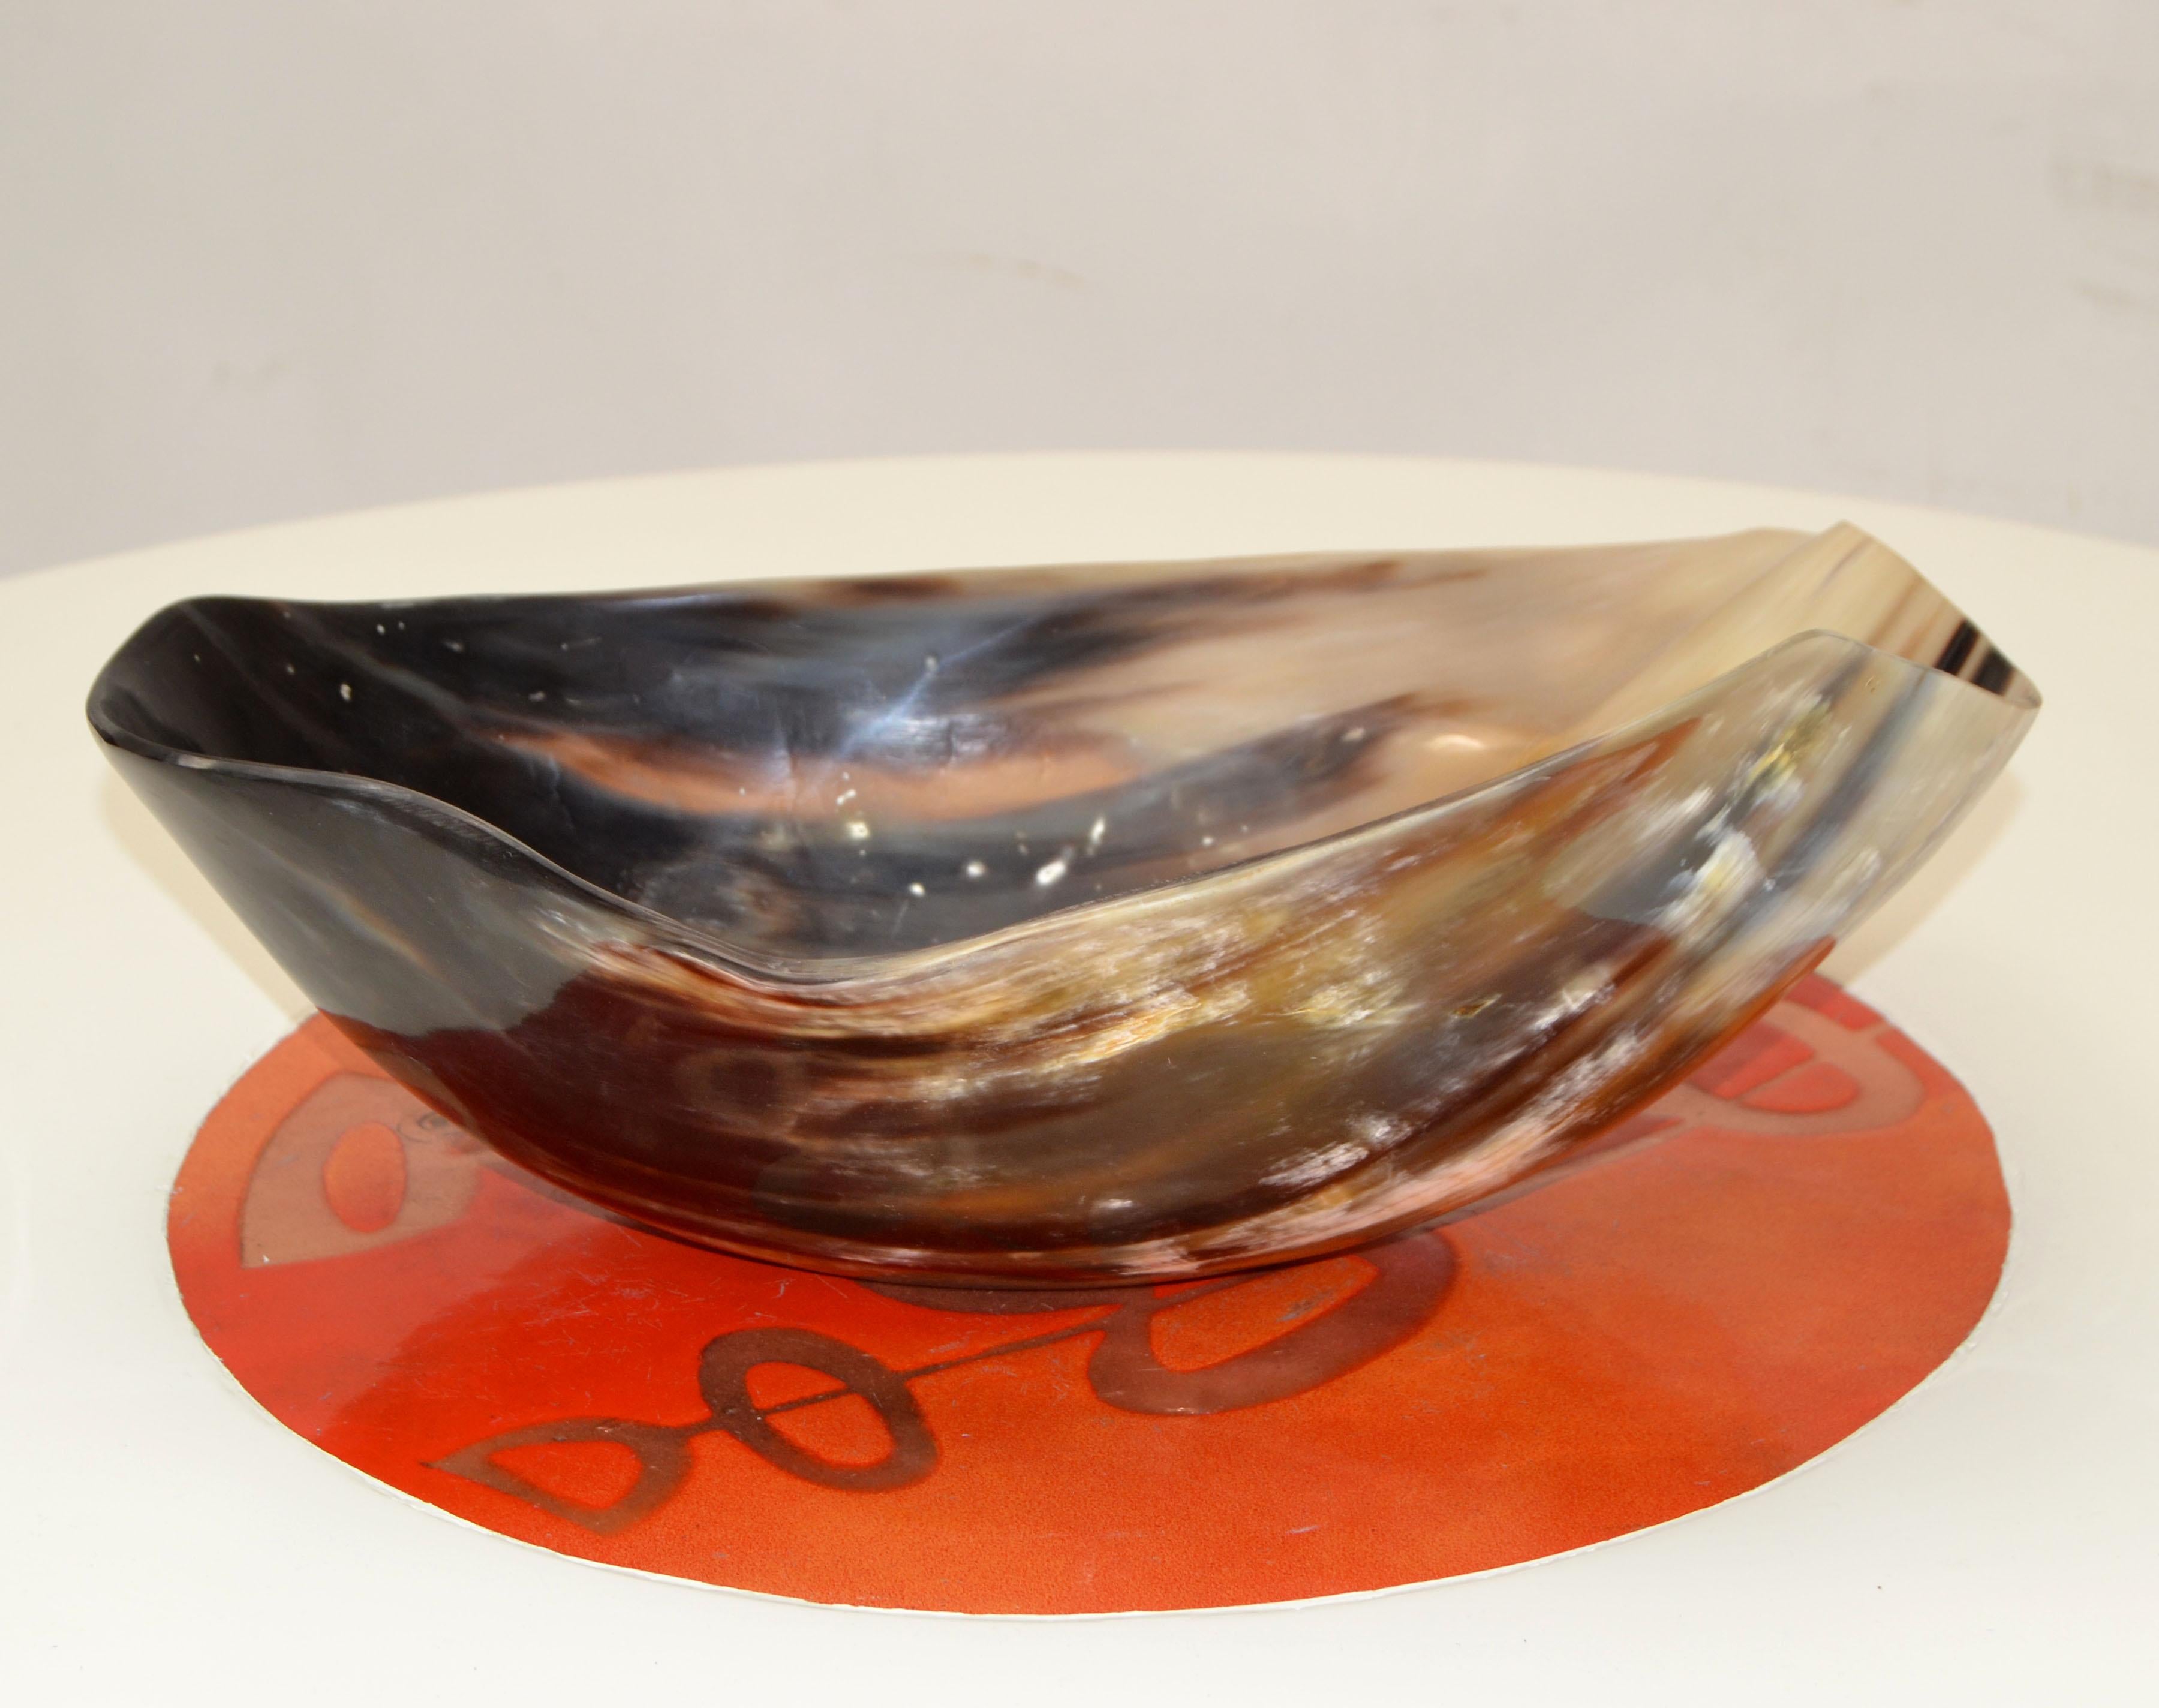 Polished Handmade Horn Bowl, Catchall, Vessel, Centerpiece Mid-Century Modern For Sale 6